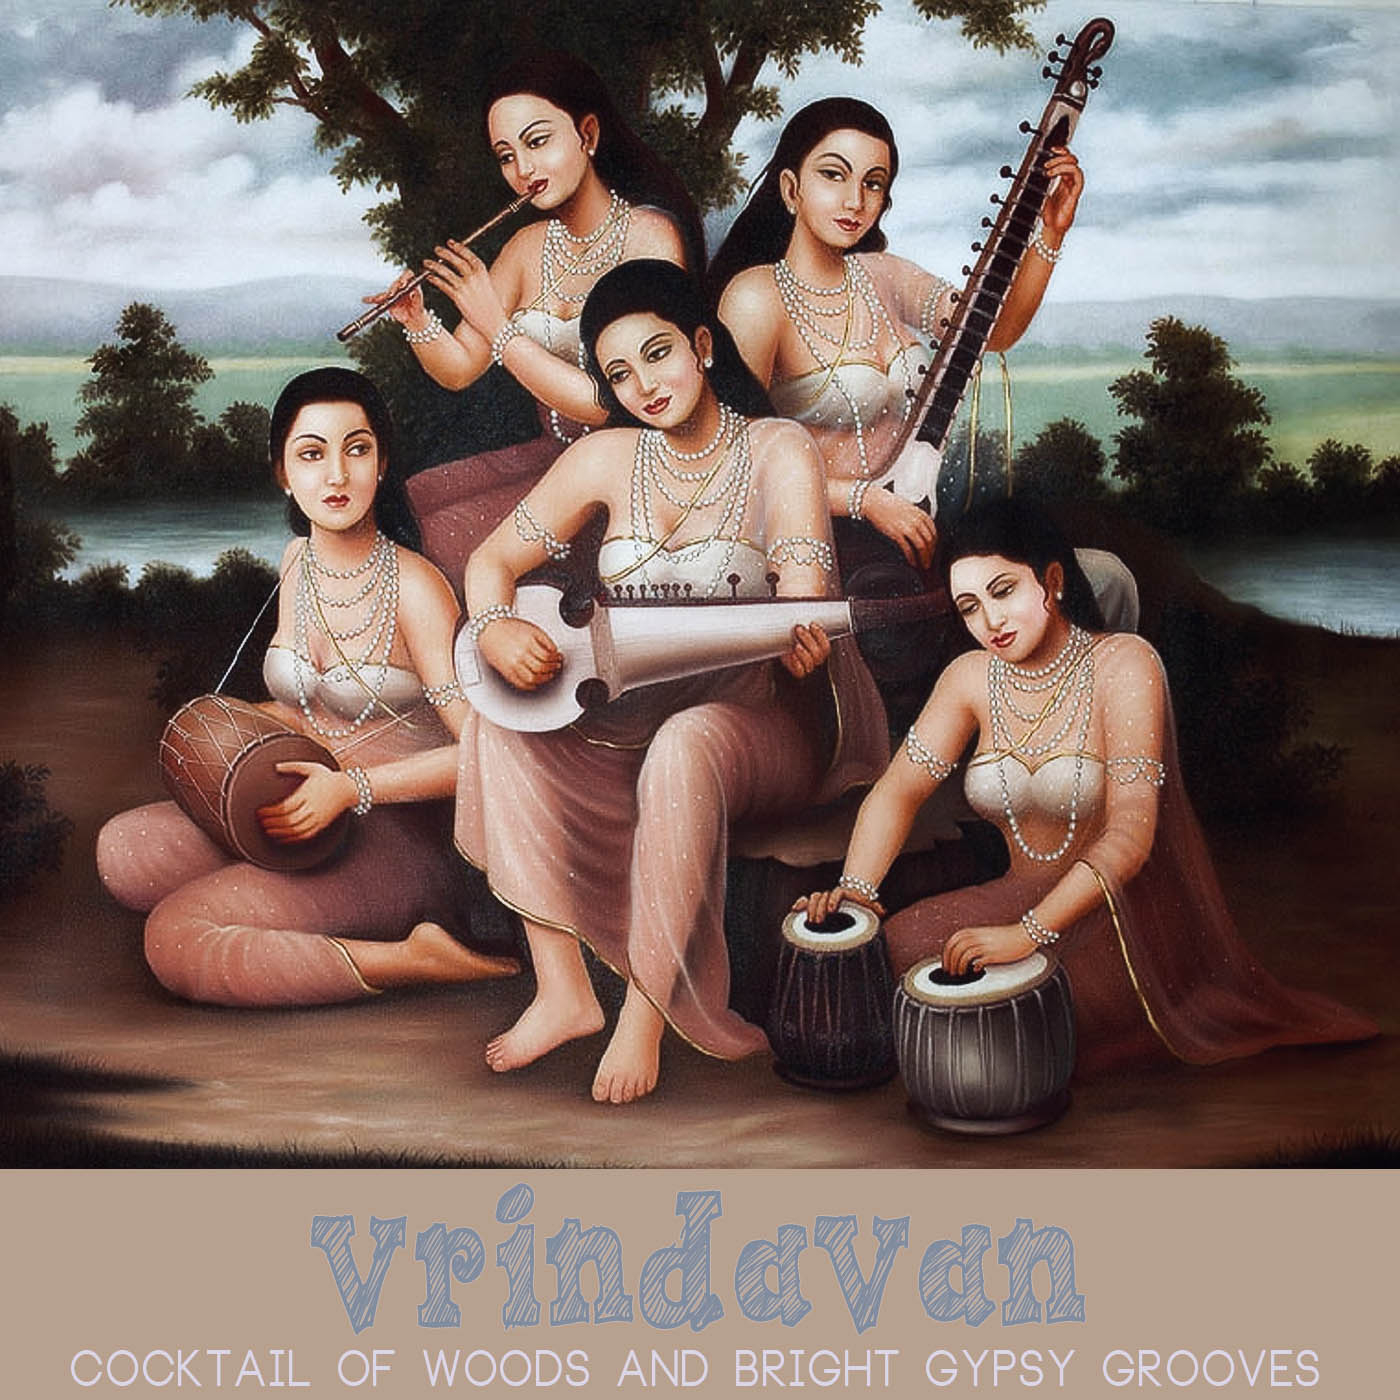 Vrindavan: Cocktail of Woods and Bright Gypsy Grooves (Compiled by Delirium Spree Mechanism)